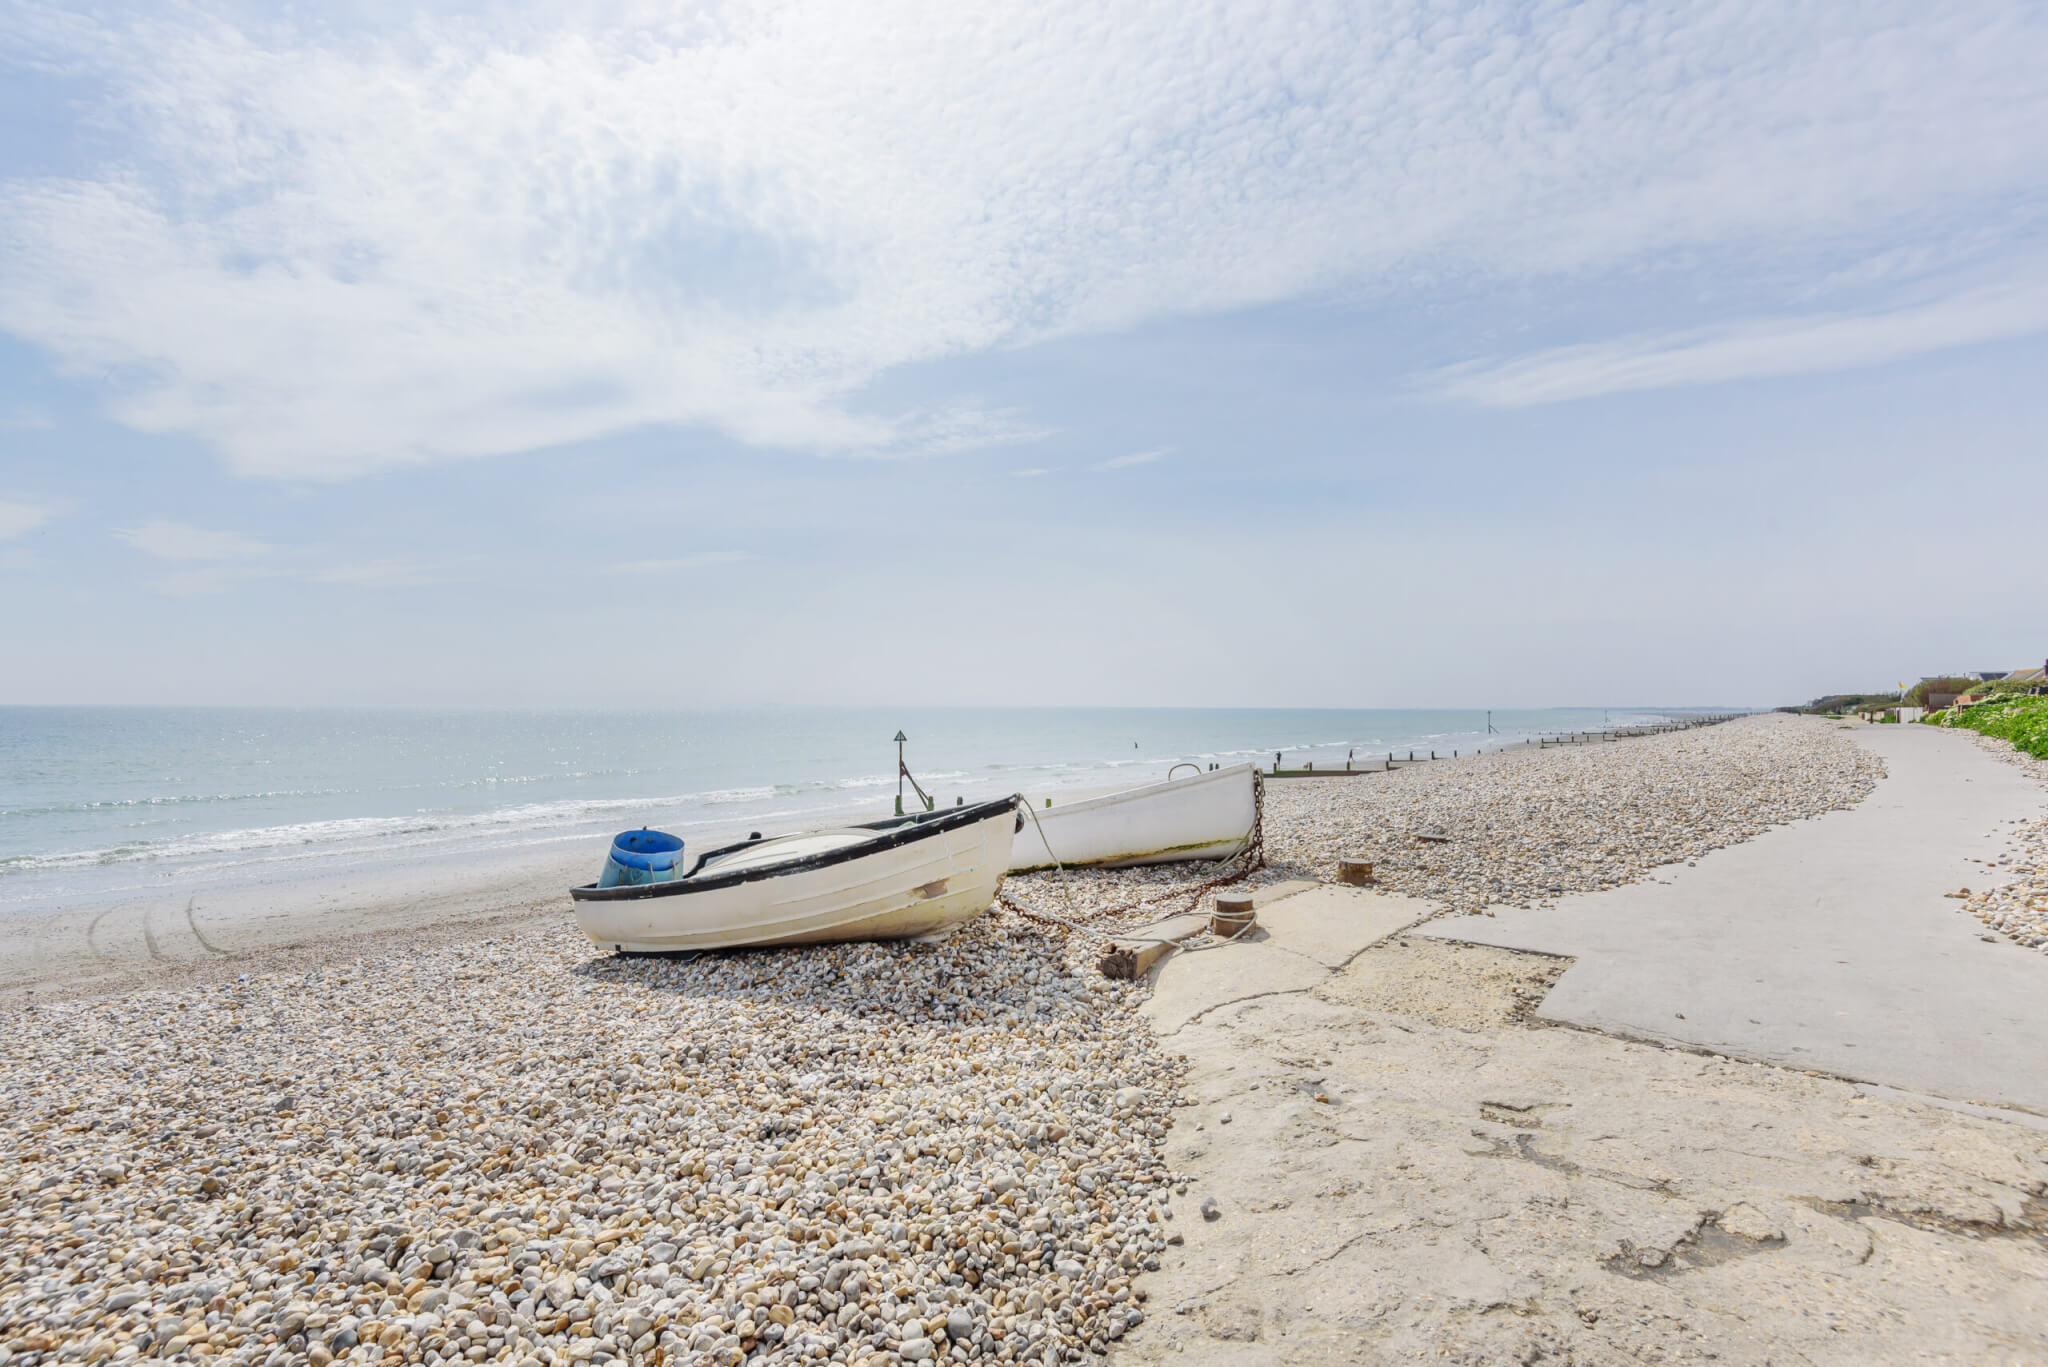 14. Explore the area - East Wittering